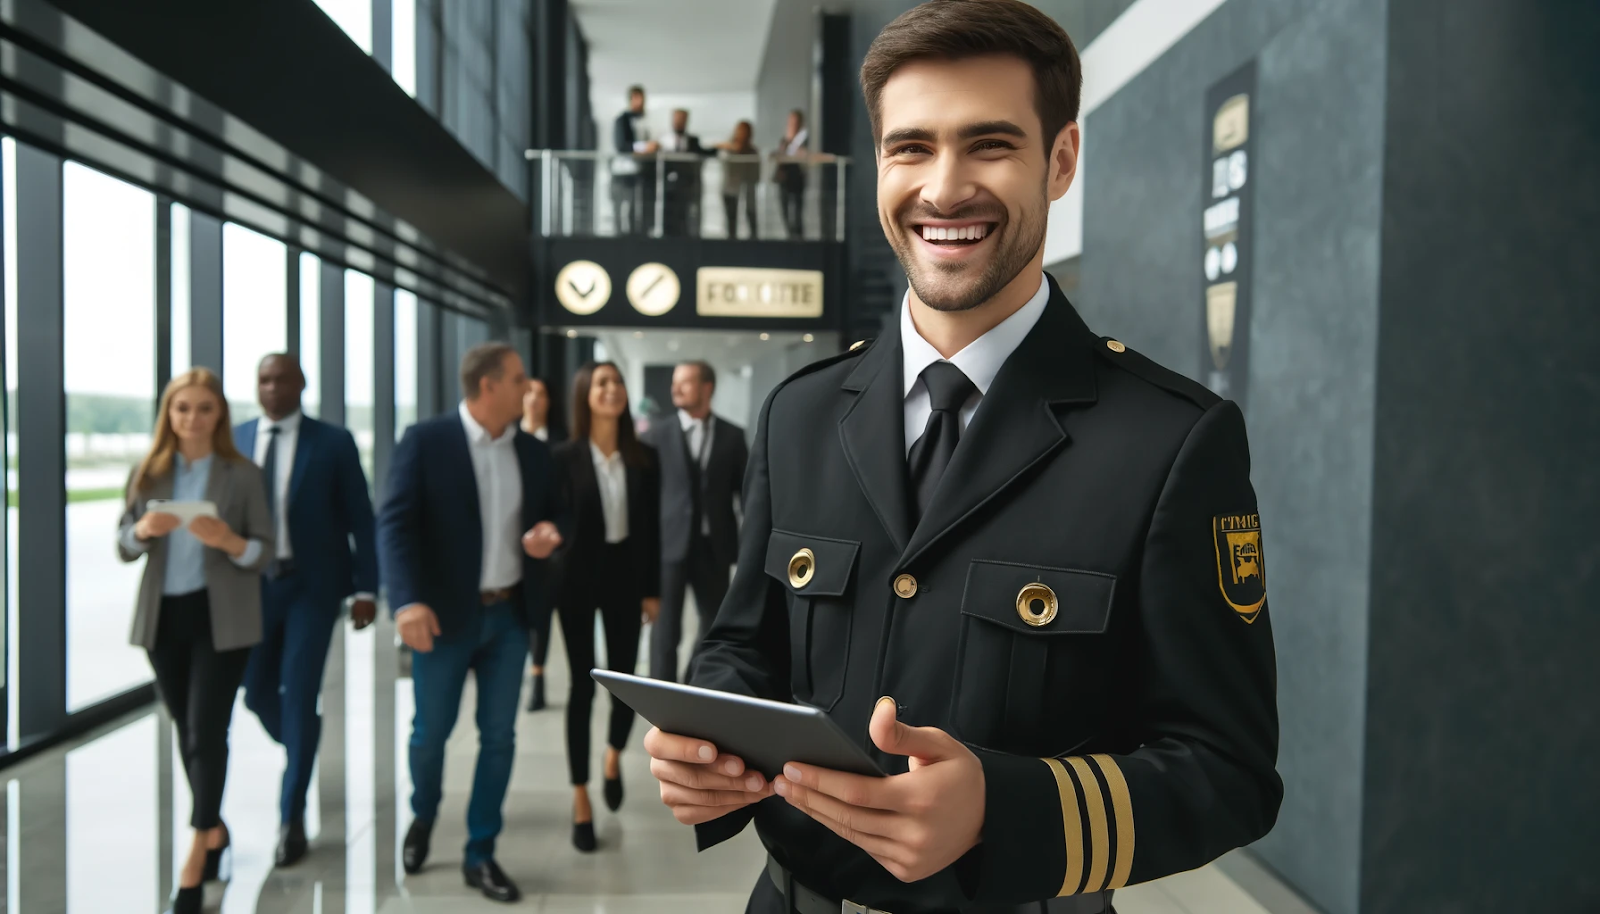 A cheerful security guard wearing black and gold uniform, patrolling an office building, representing future security trends.